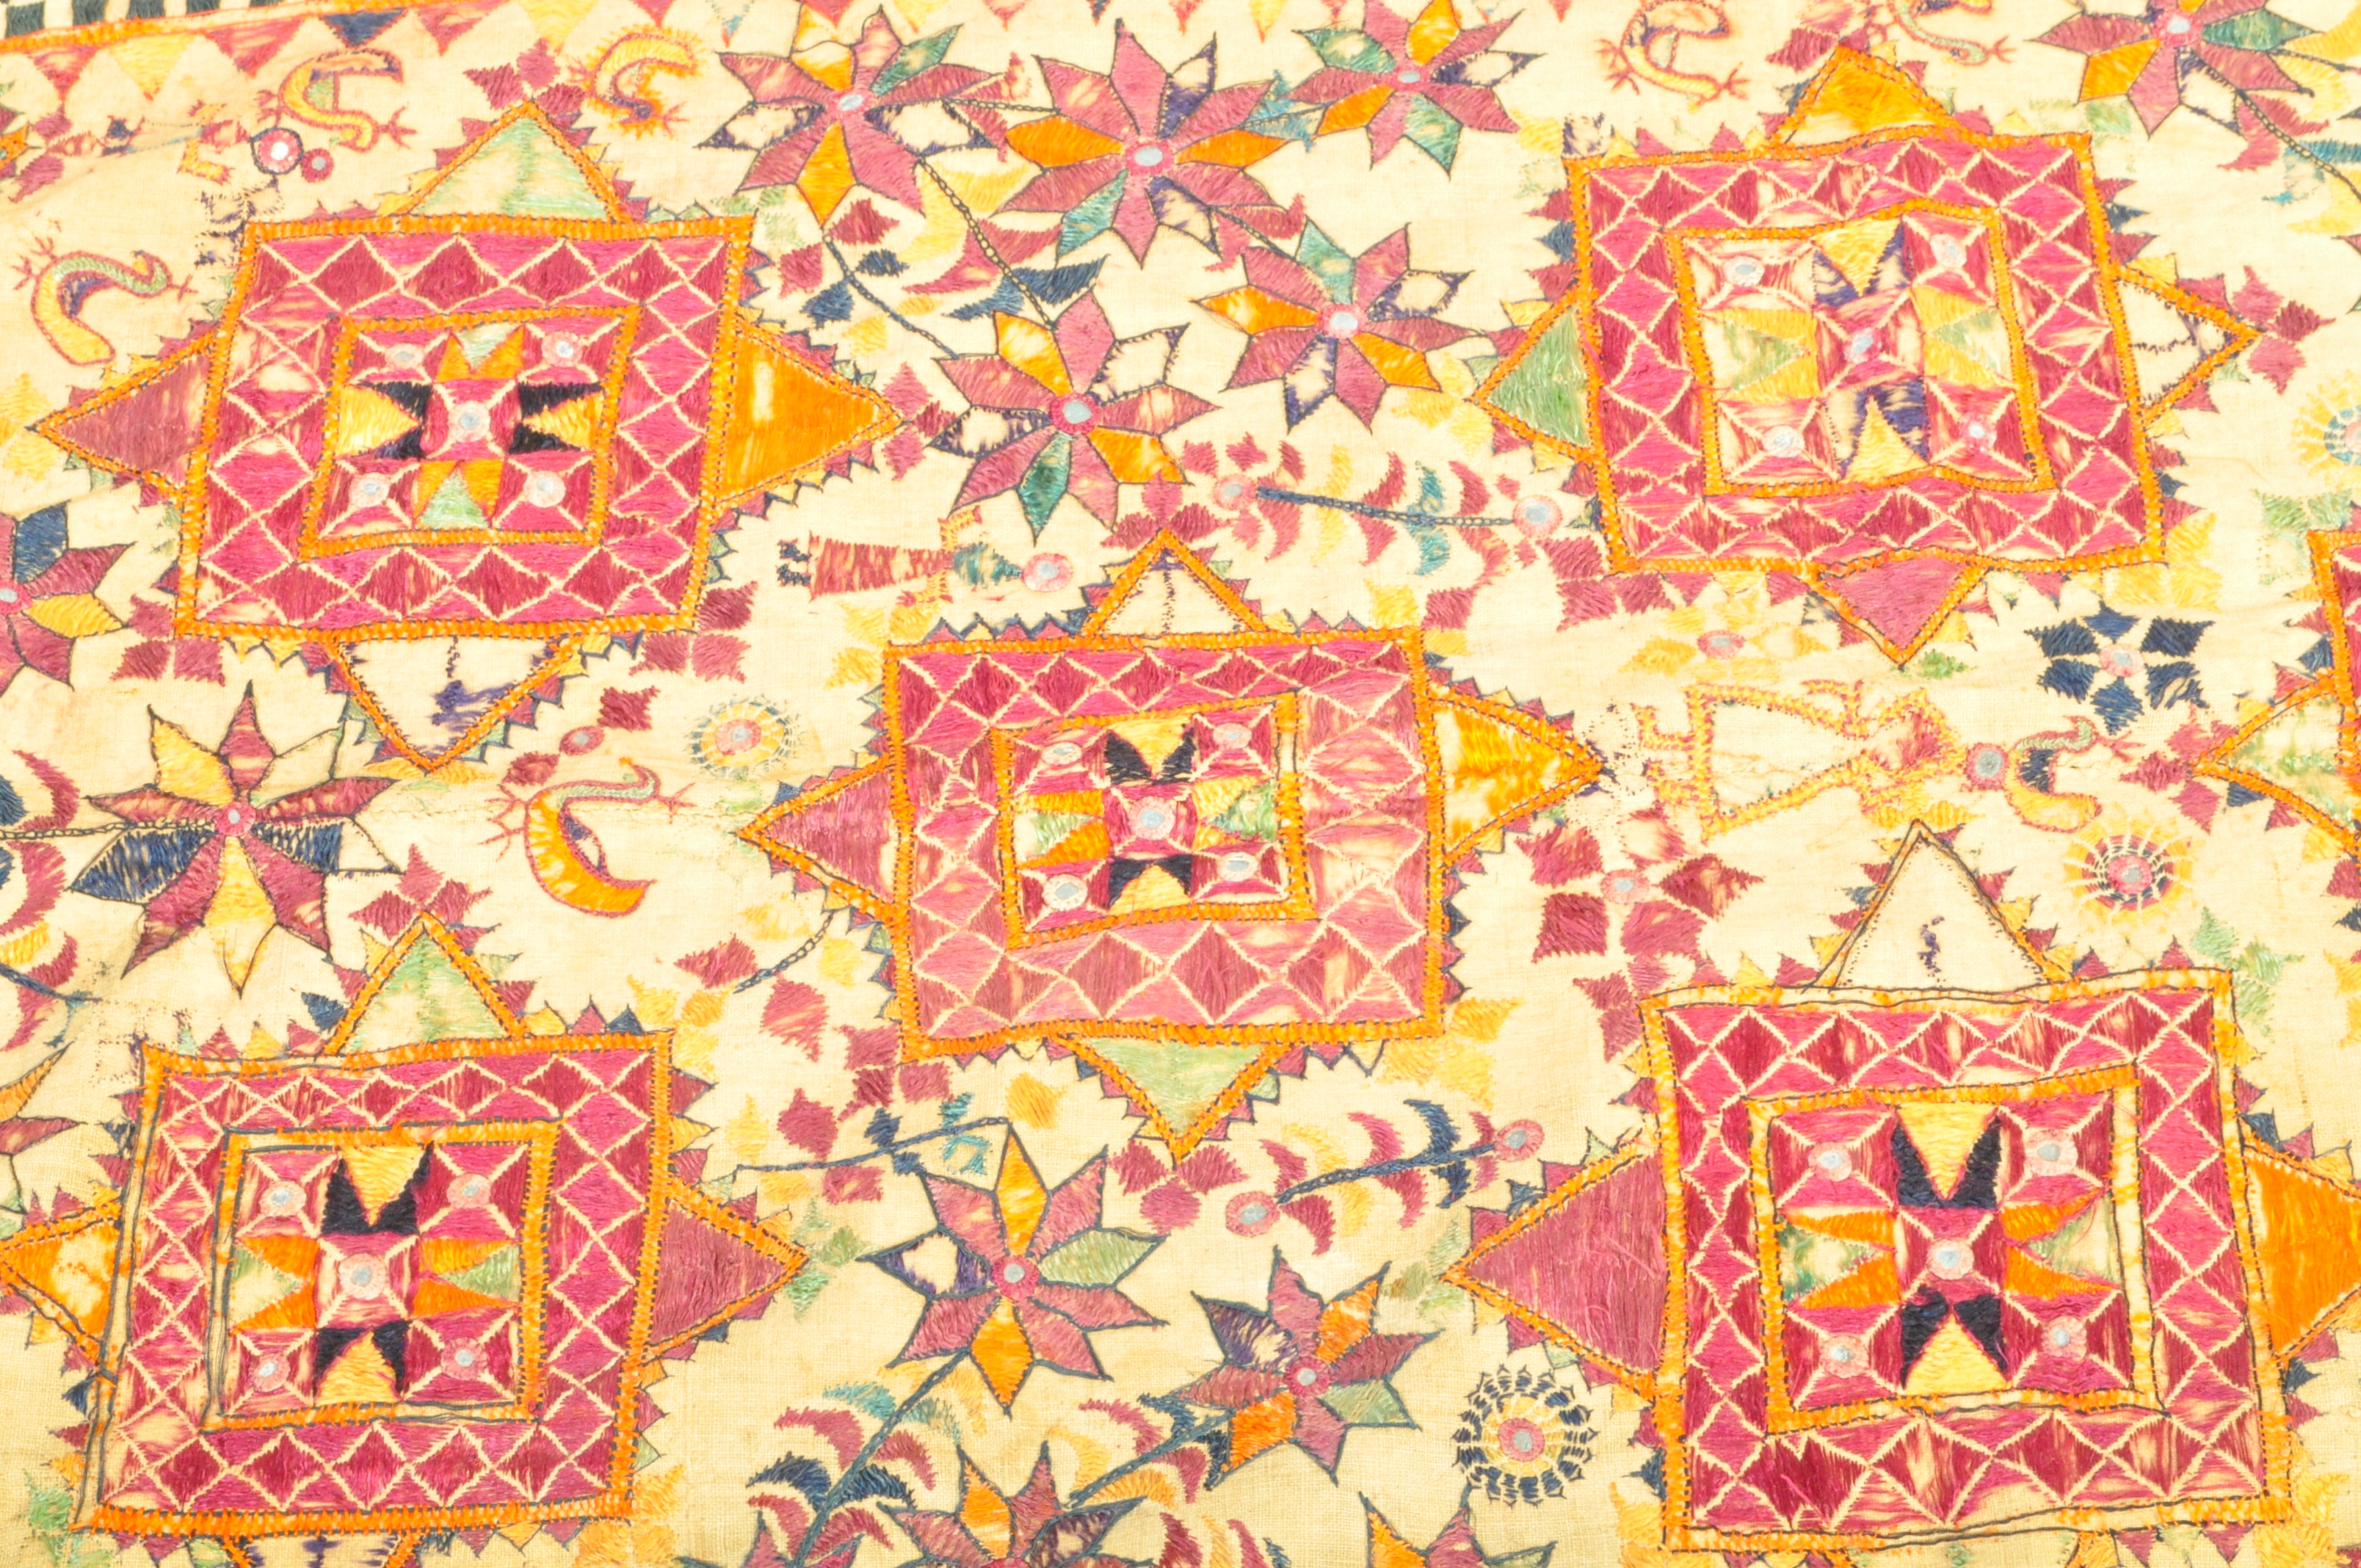 EARLY 20TH CENTURY INDIAN EMBROIDERED SHISHA TEXTILE - Image 4 of 7